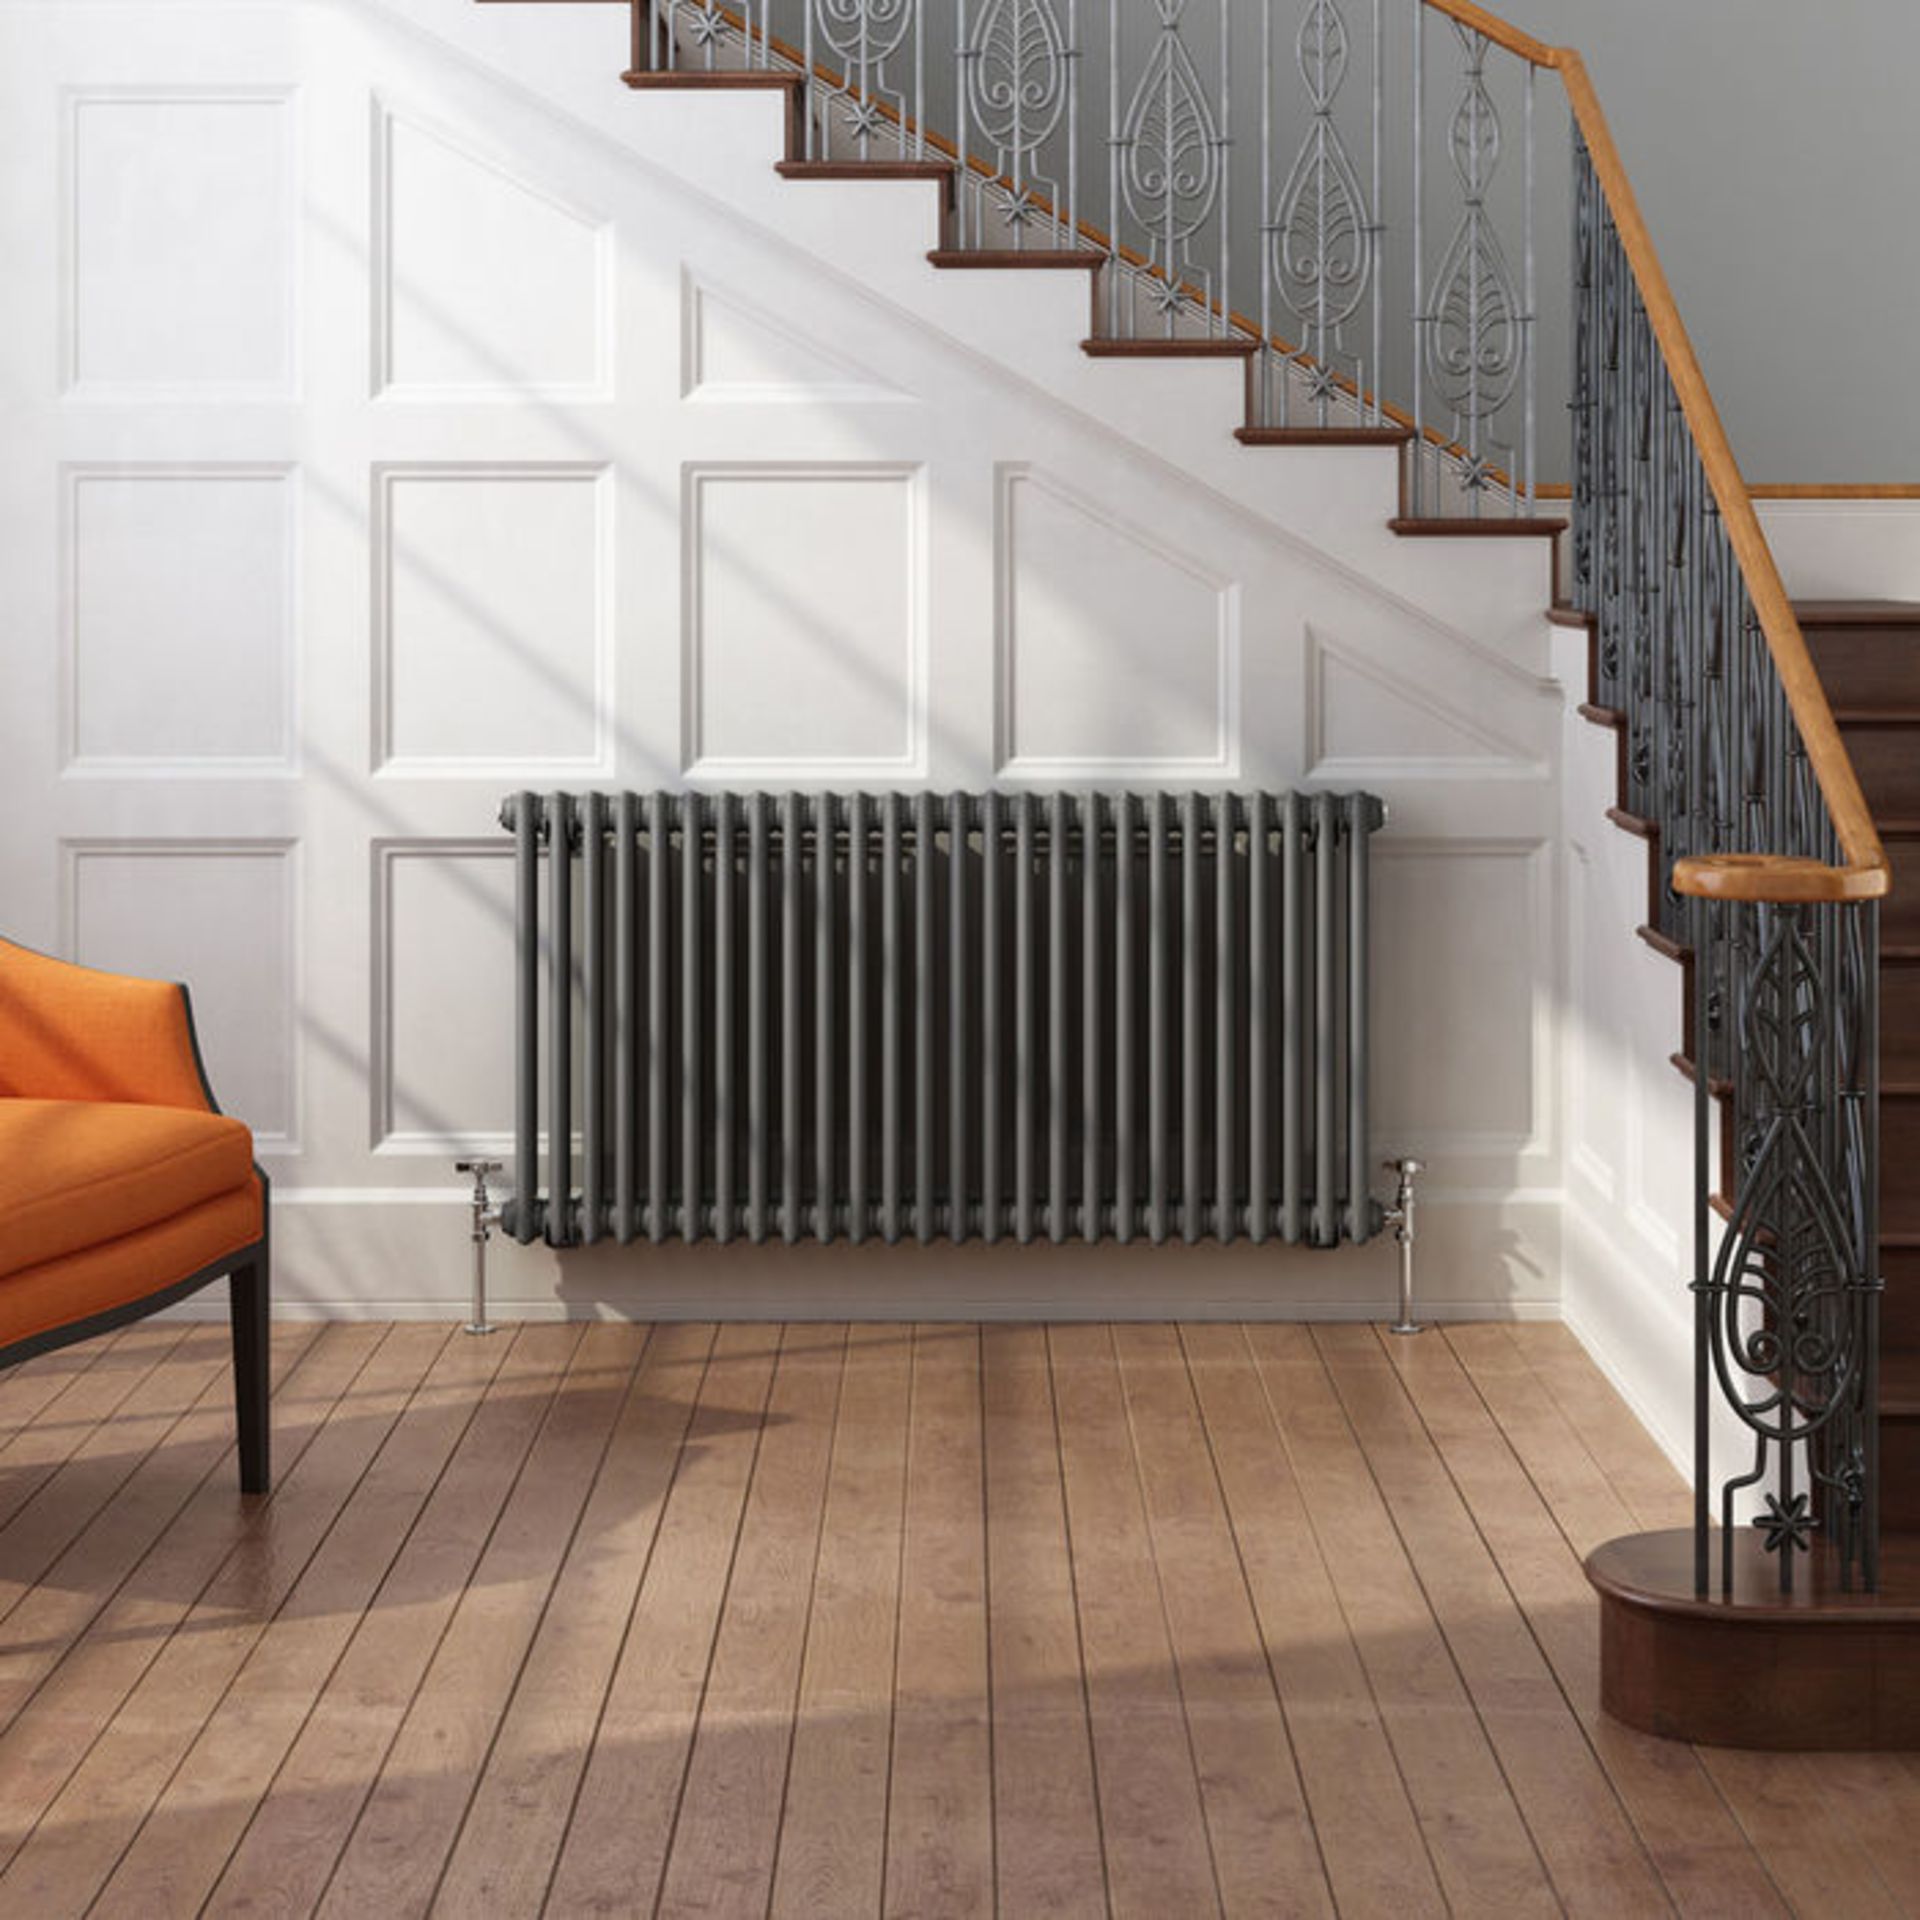 (XM10) 600x1188mm Anthracite Double Panel Horizontal Colosseum Traditional Radiator. RRP £399.99. - Image 3 of 4